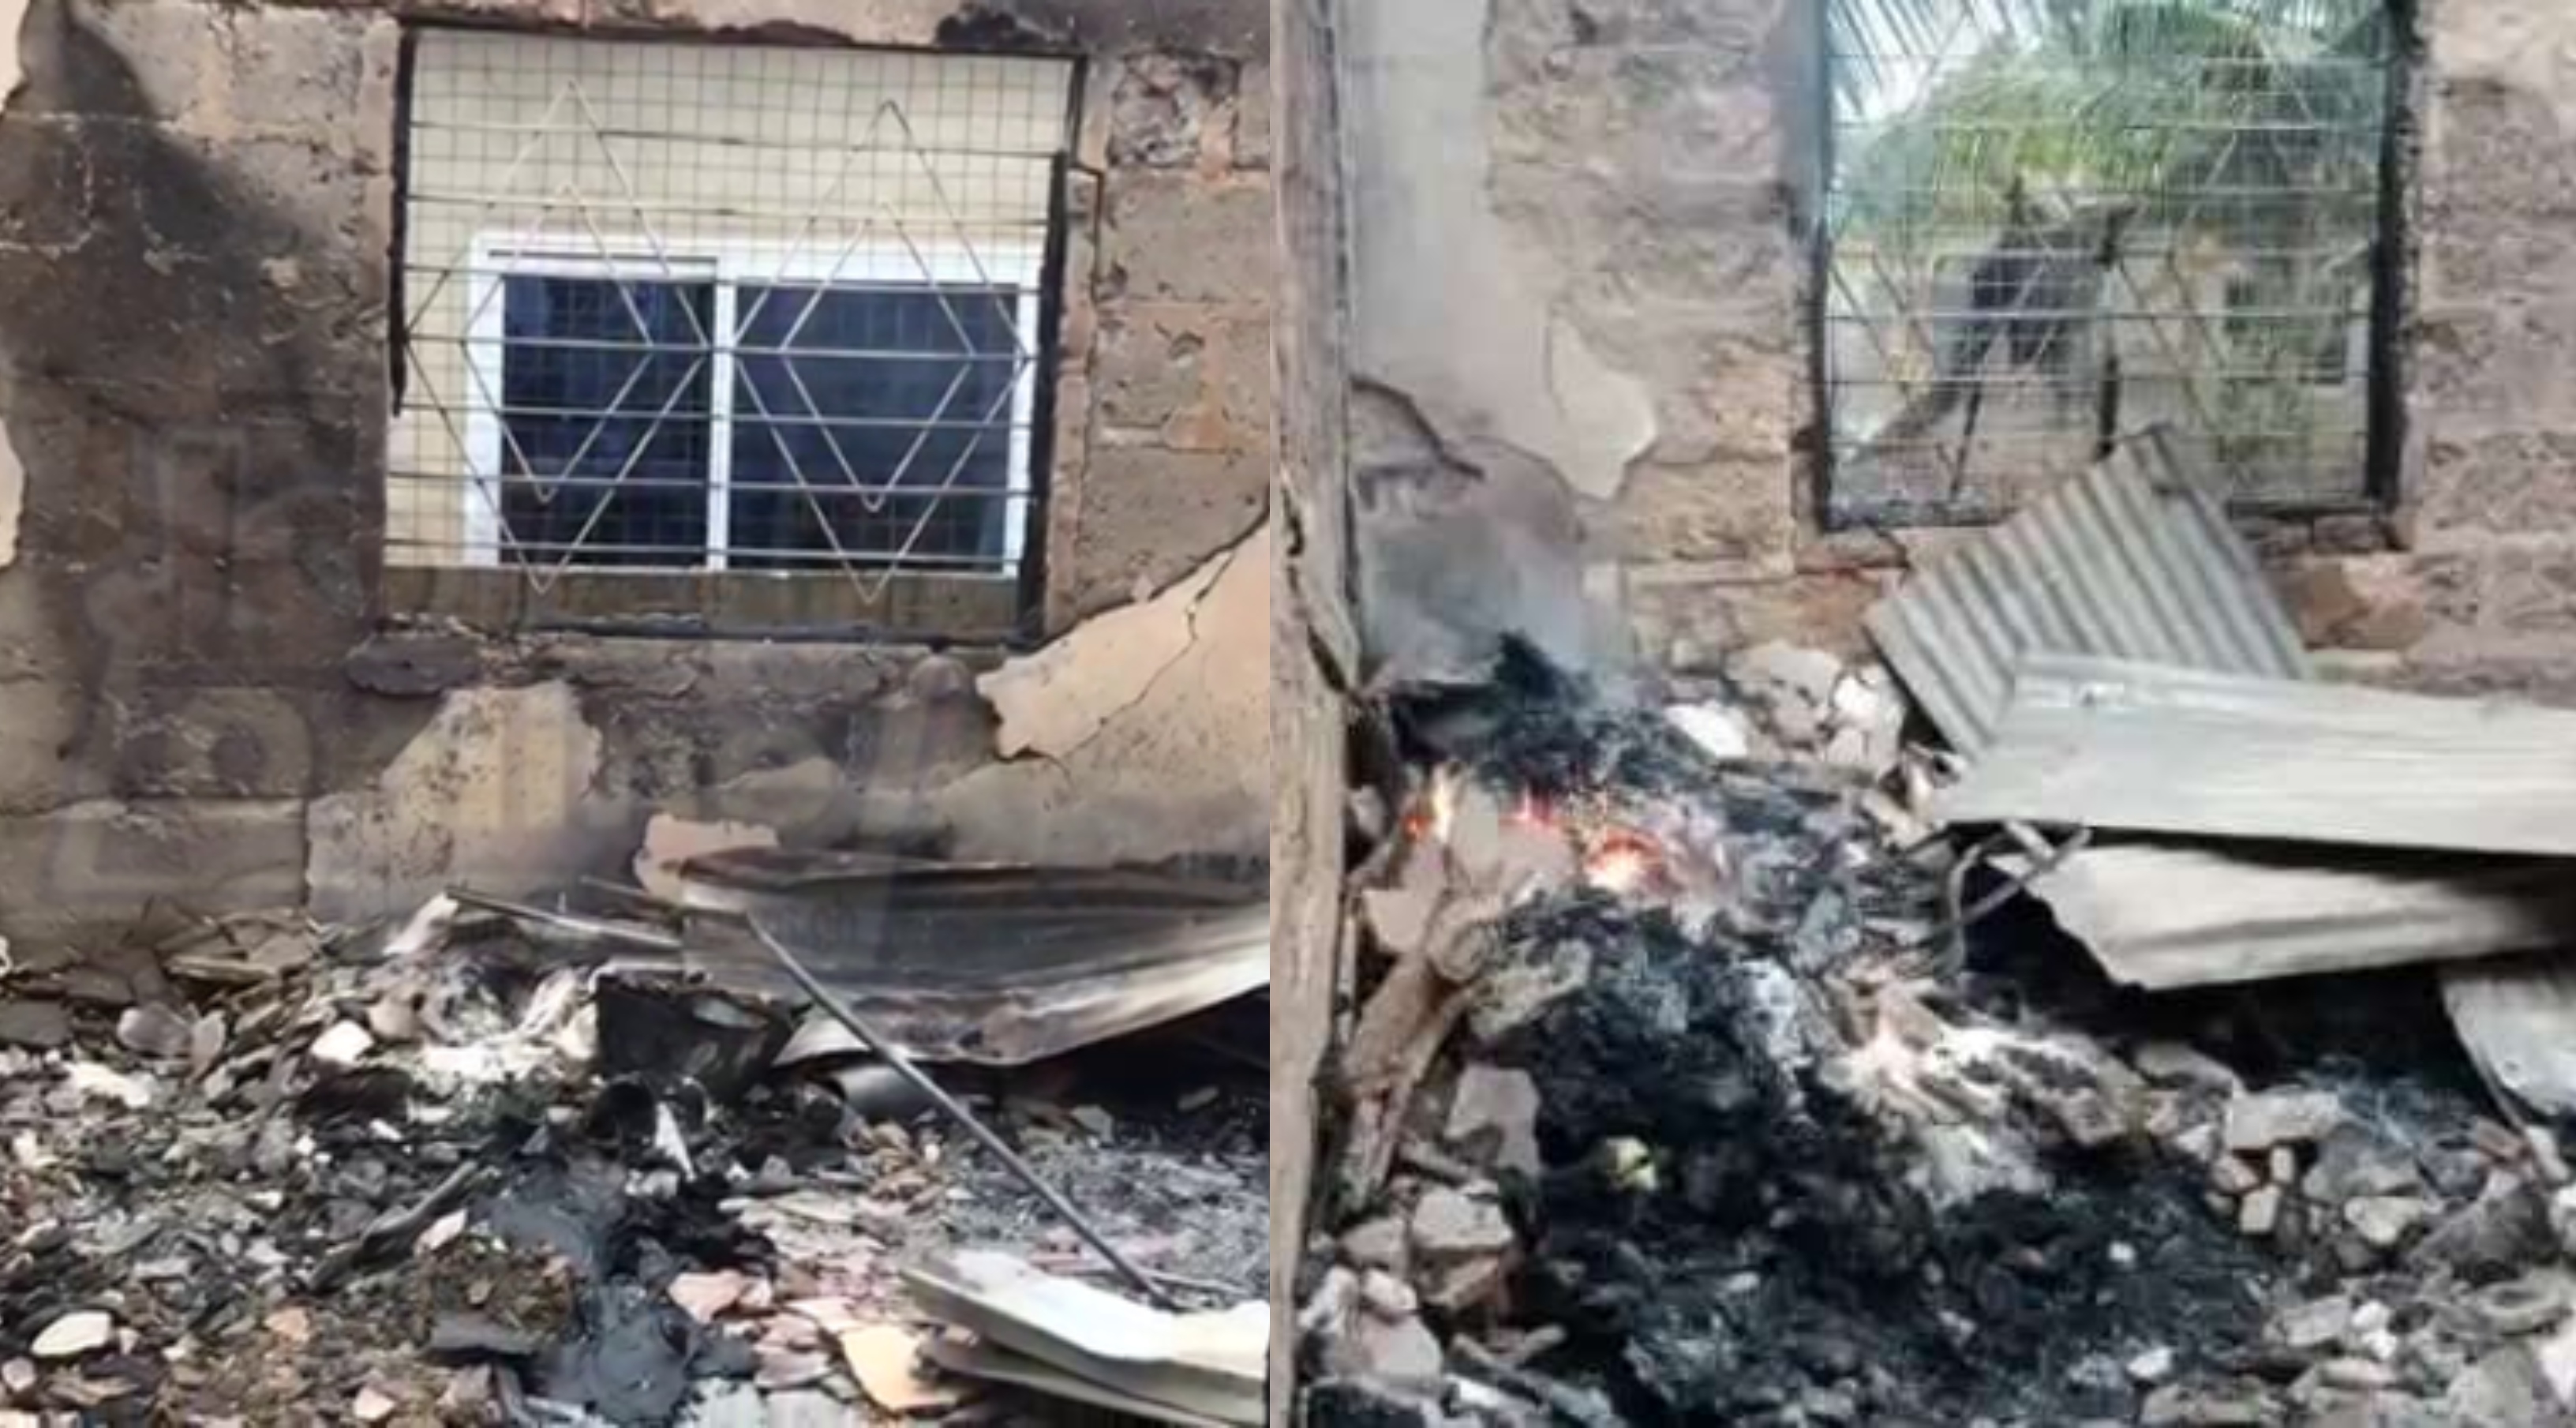 Pregnant woman and 2 sons burnt to death, neighbours suspect arson